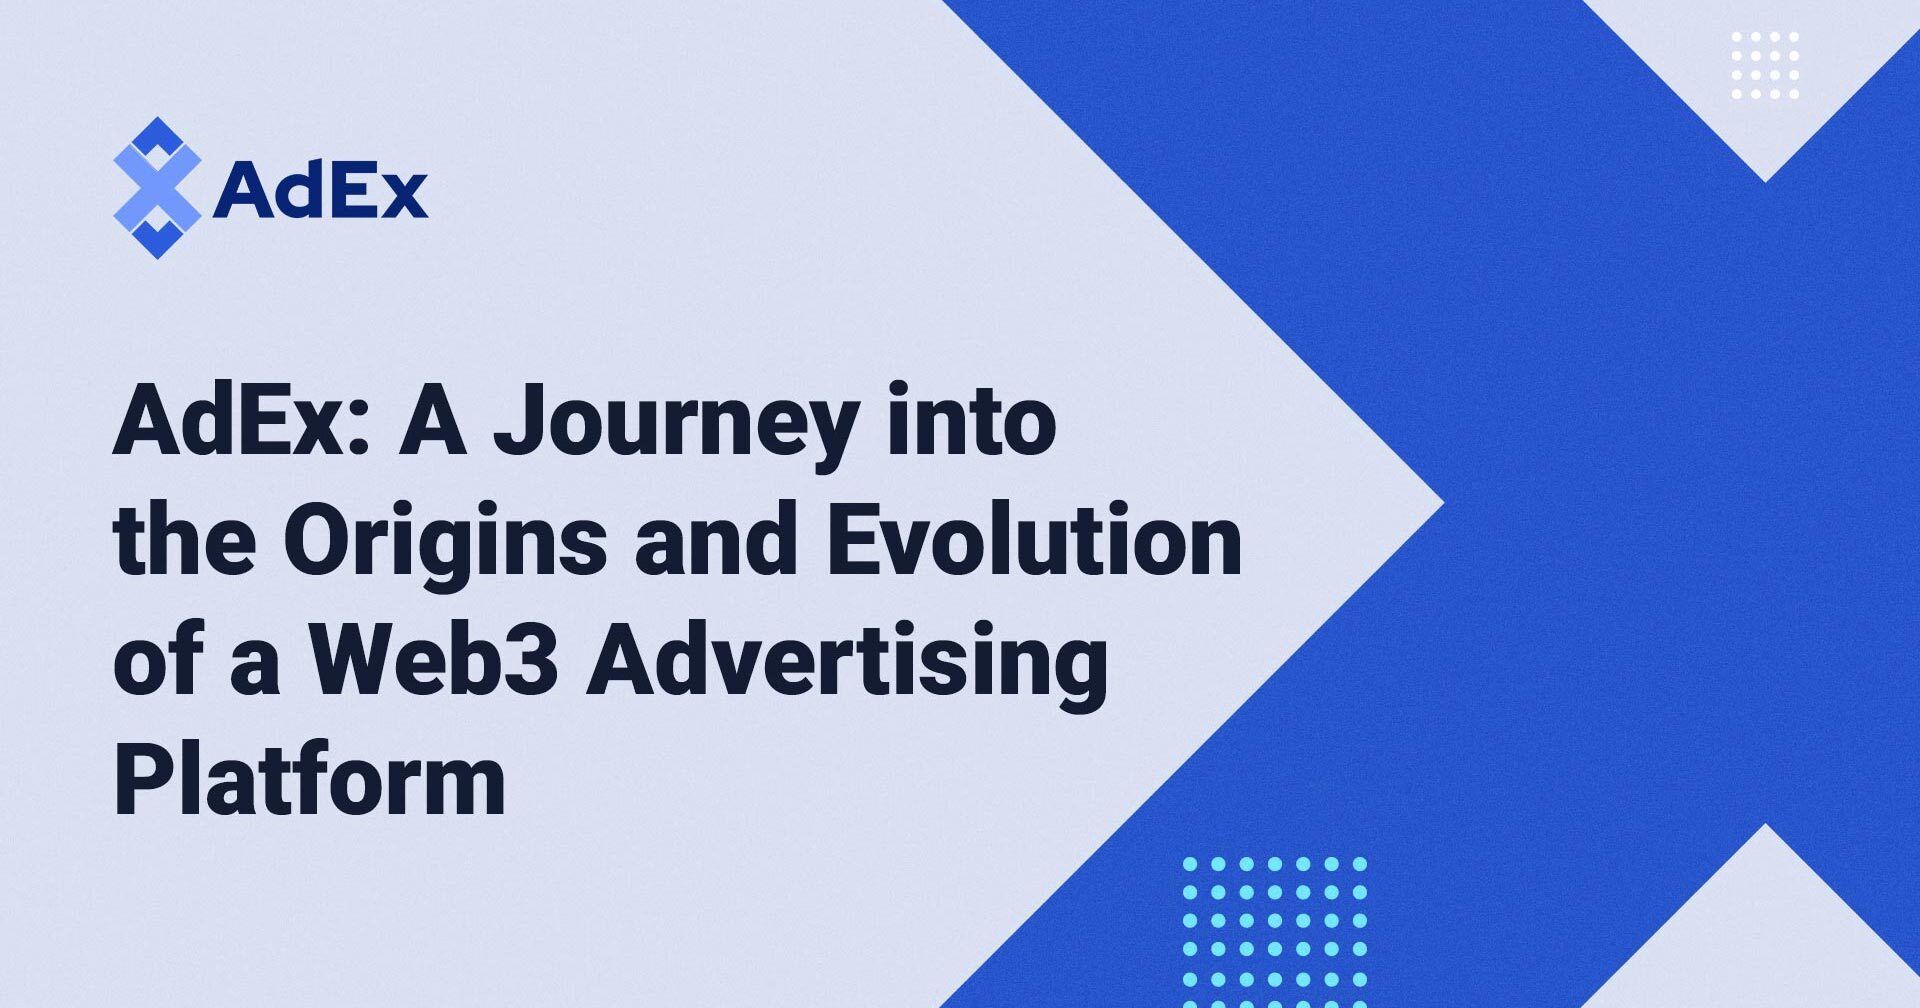 AdEx: A Journey into the Origins and Evolution of a Web3 Advertising Platform